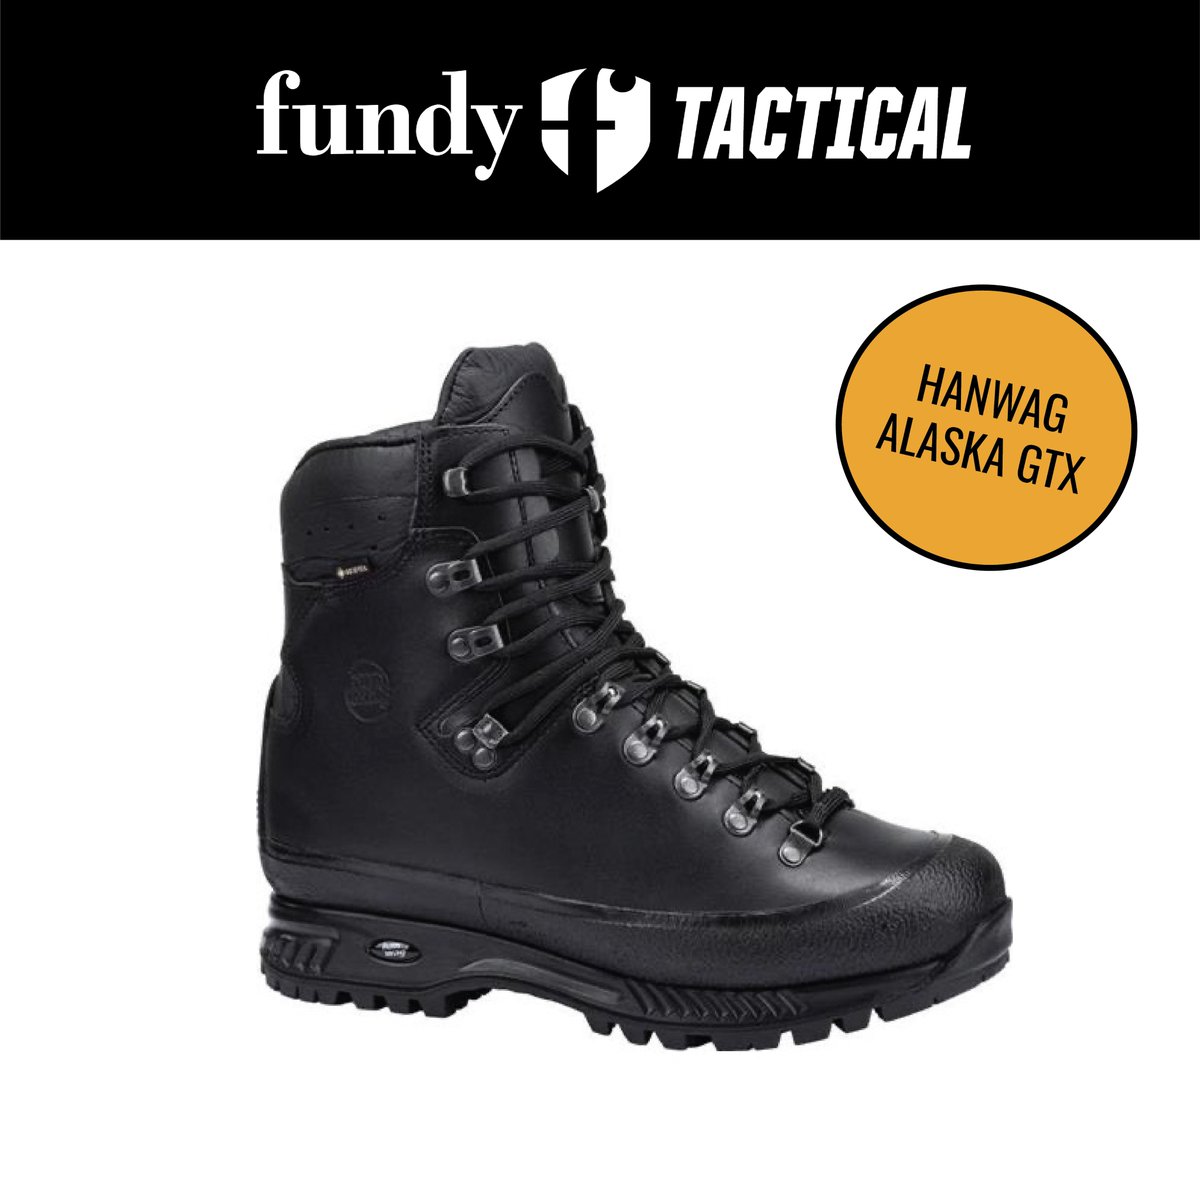 It's time for our staff pick of the week! Don from Dartmouth Fundy Tactical's pick is the Hanwag Alaska Gtx Boots. According to Don, these are excellent tactical boots with exceptional ankle support! BUILT TO LAST! Visit one of our four Fundy Tactical locations to gear up!